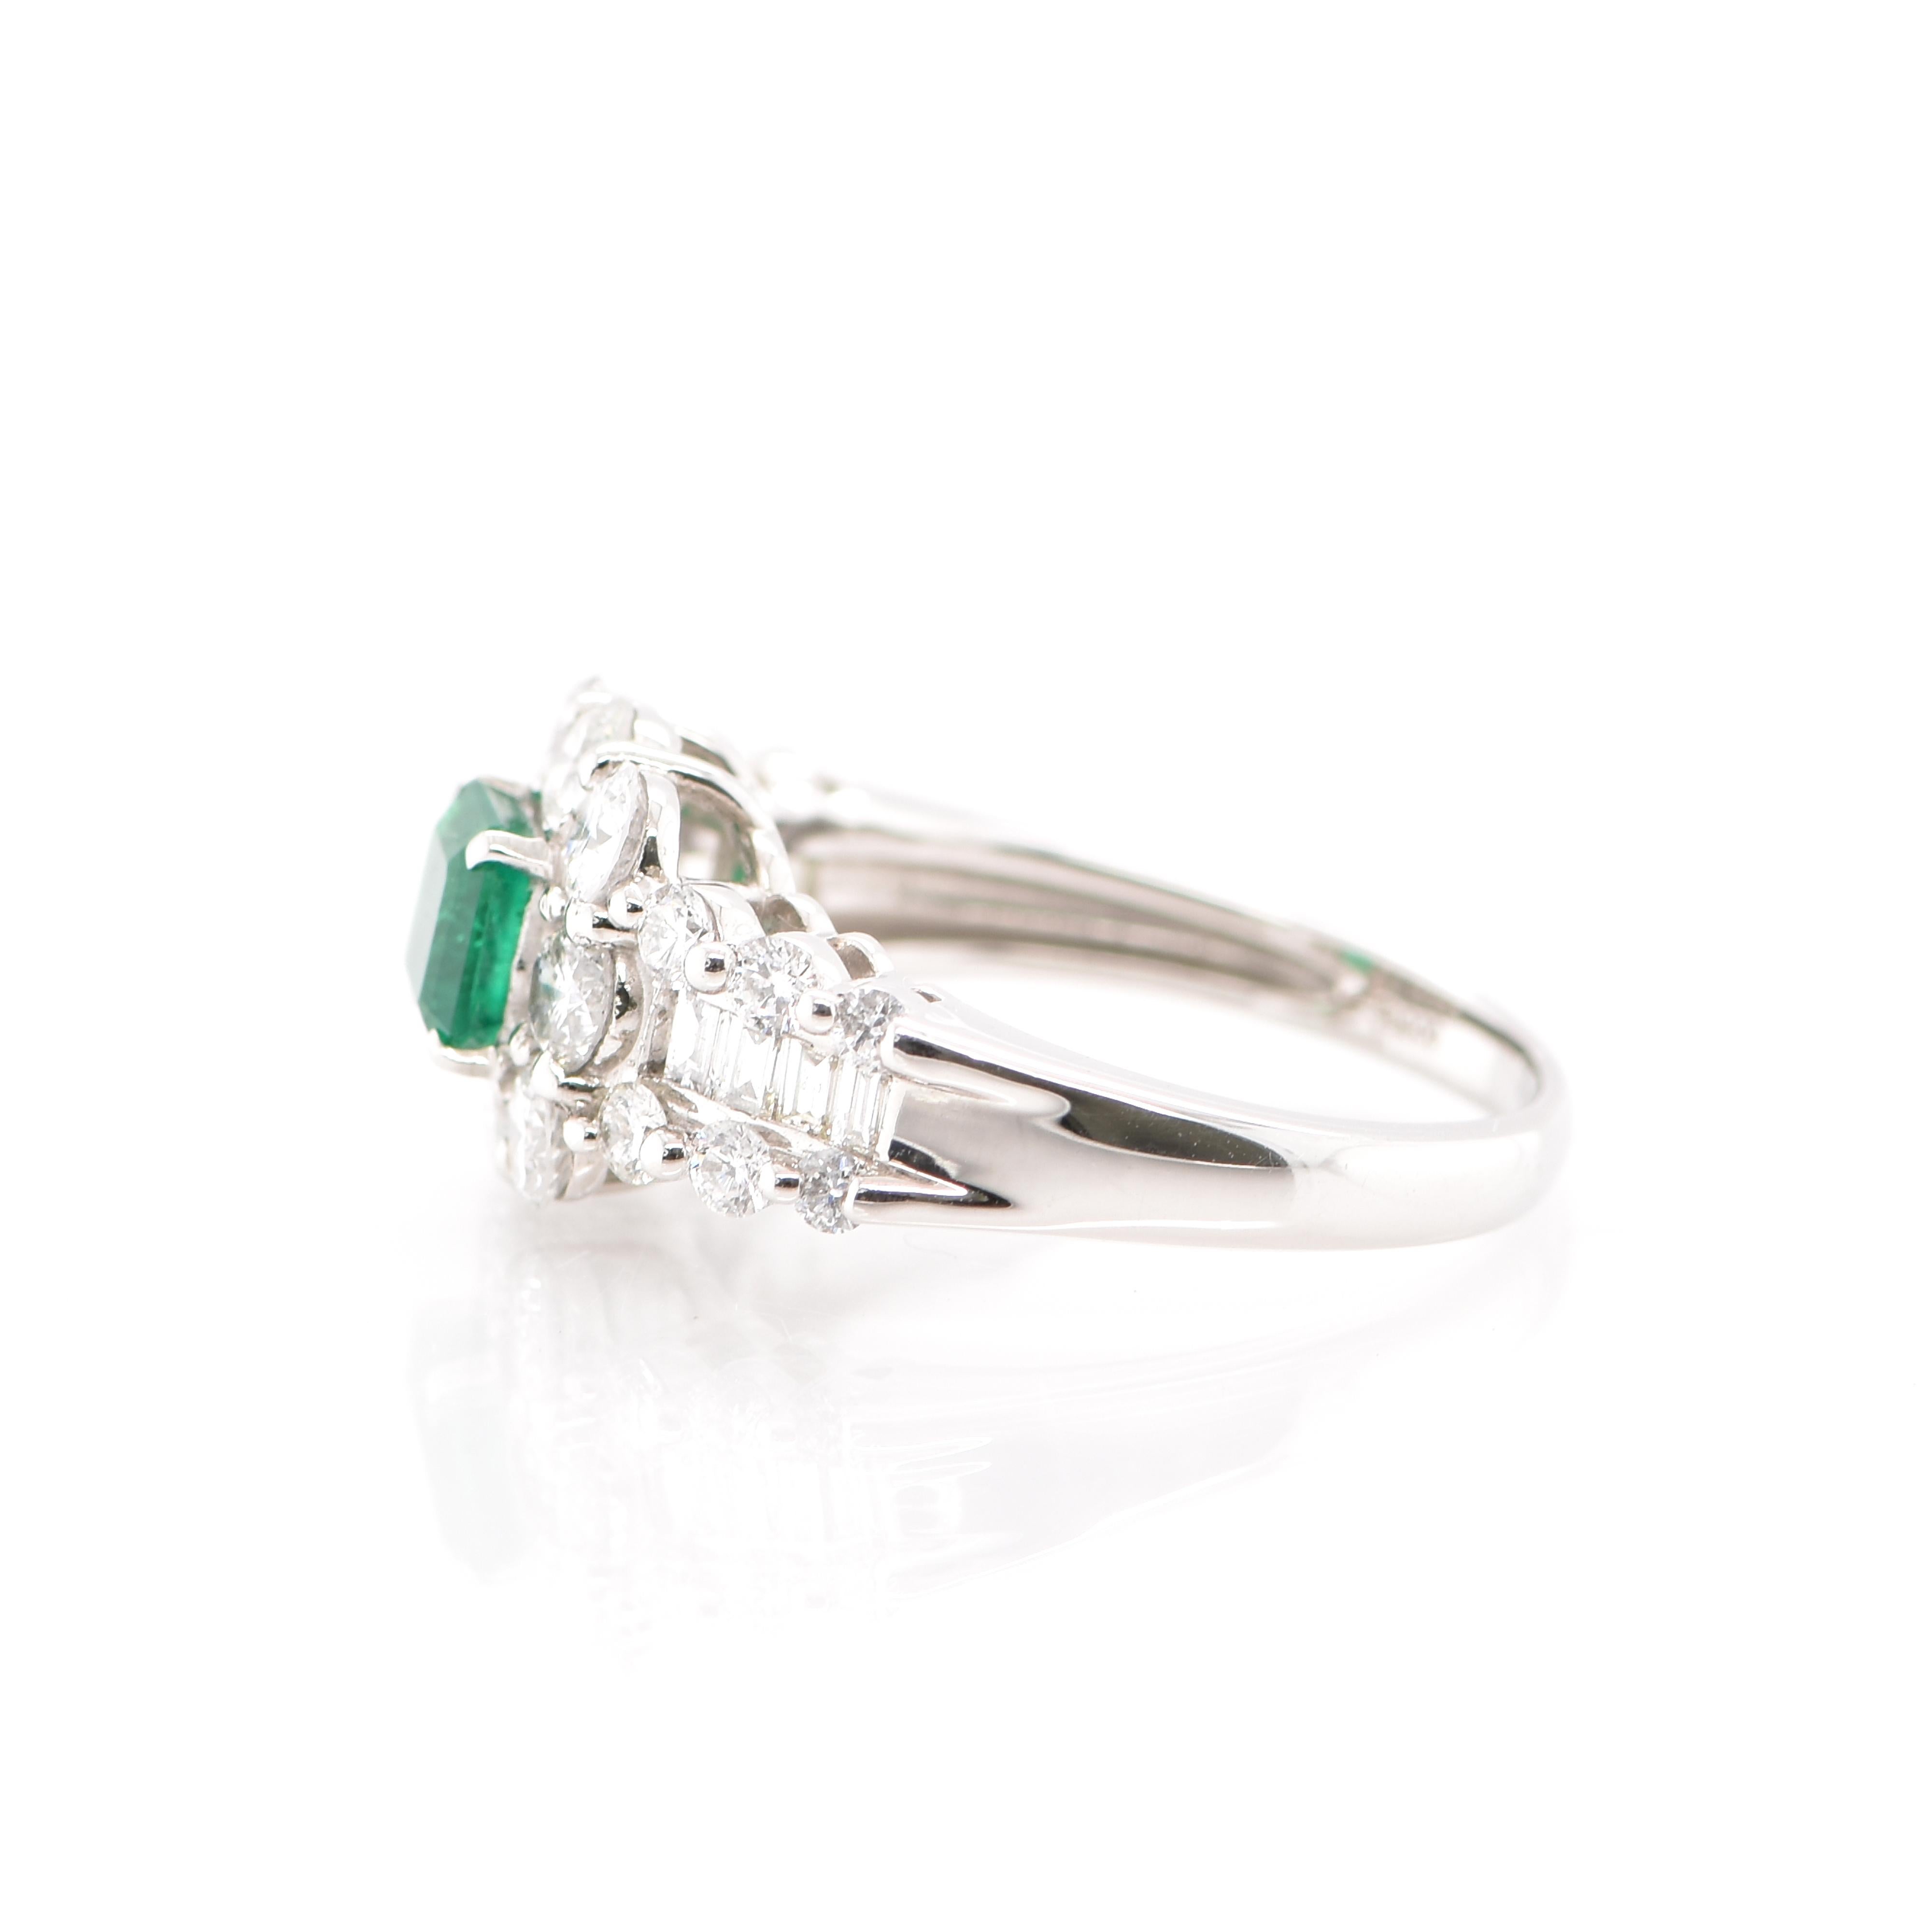 Emerald Cut GIA Certified 0.73 Carat Colombian Emerald and Diamond Ring Set in Platinum For Sale